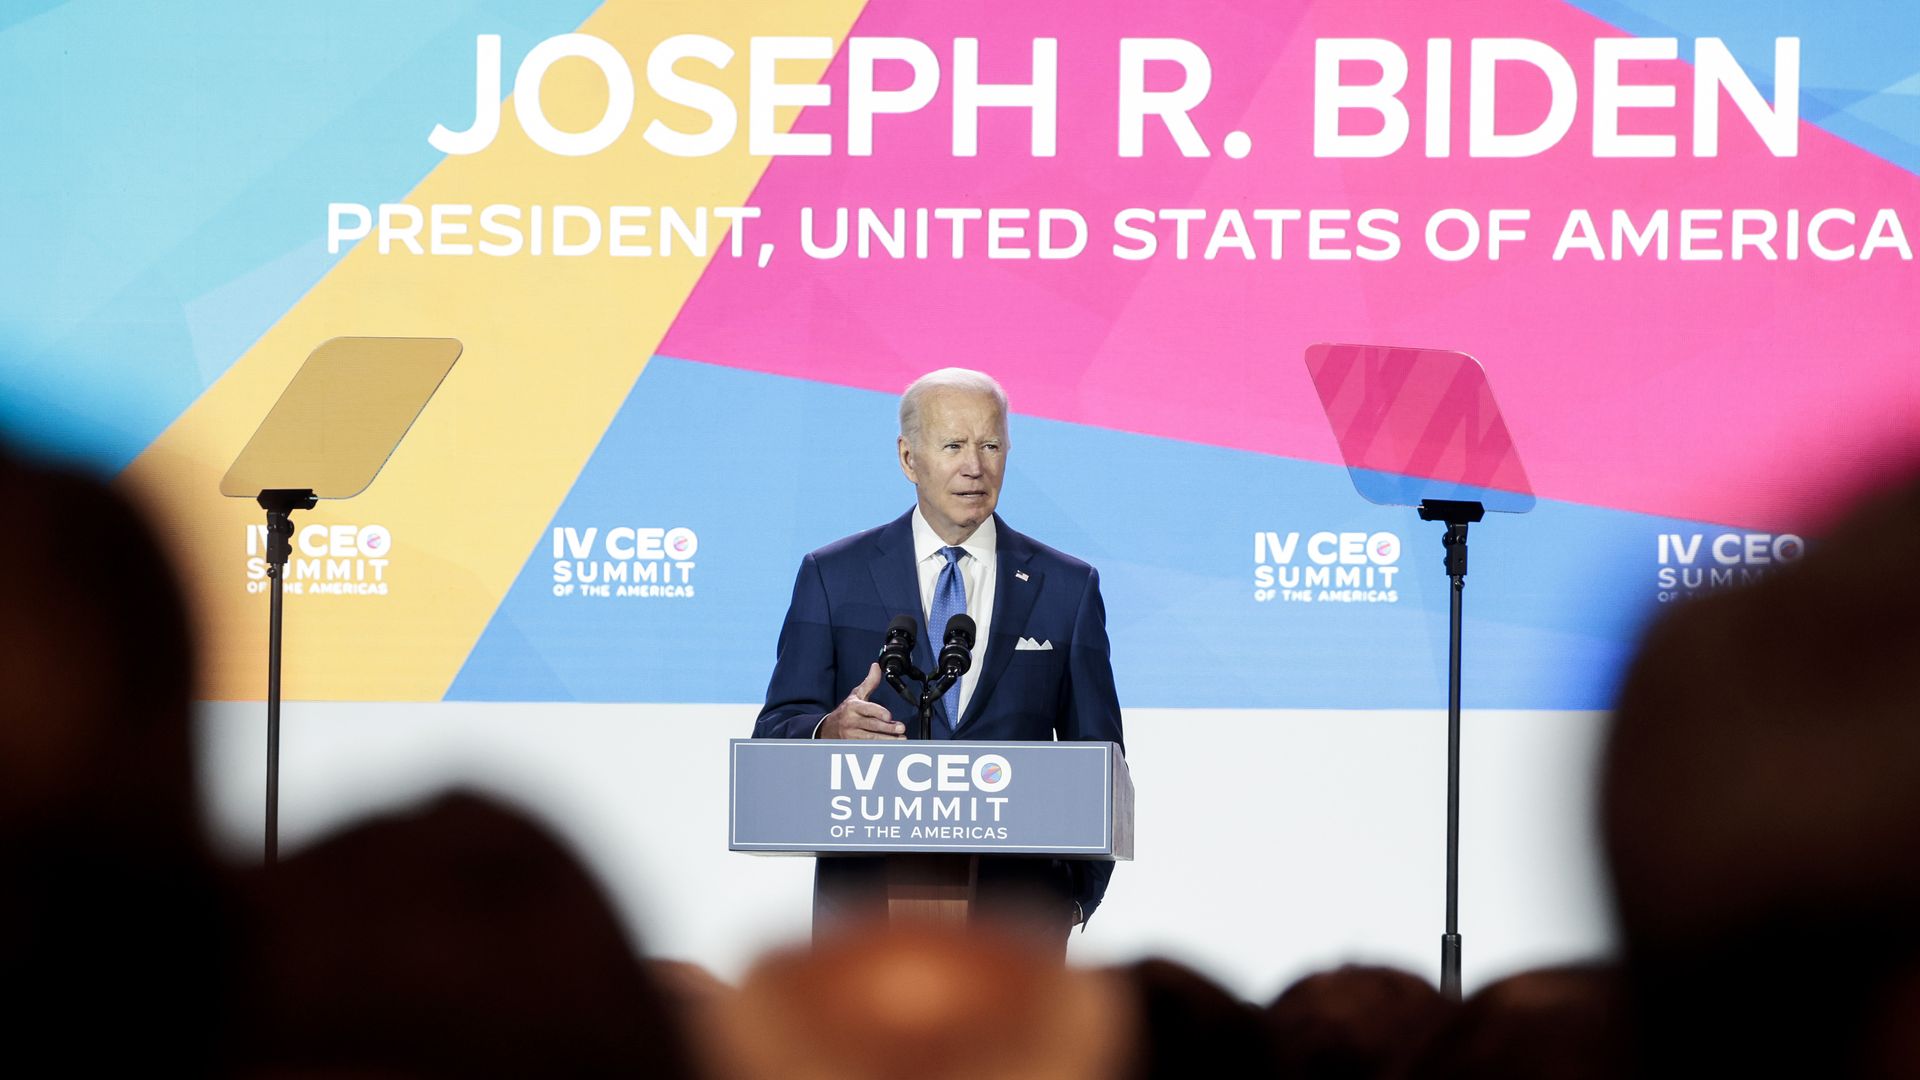  Biden speaks at a session of the CEO Summit of the Americas